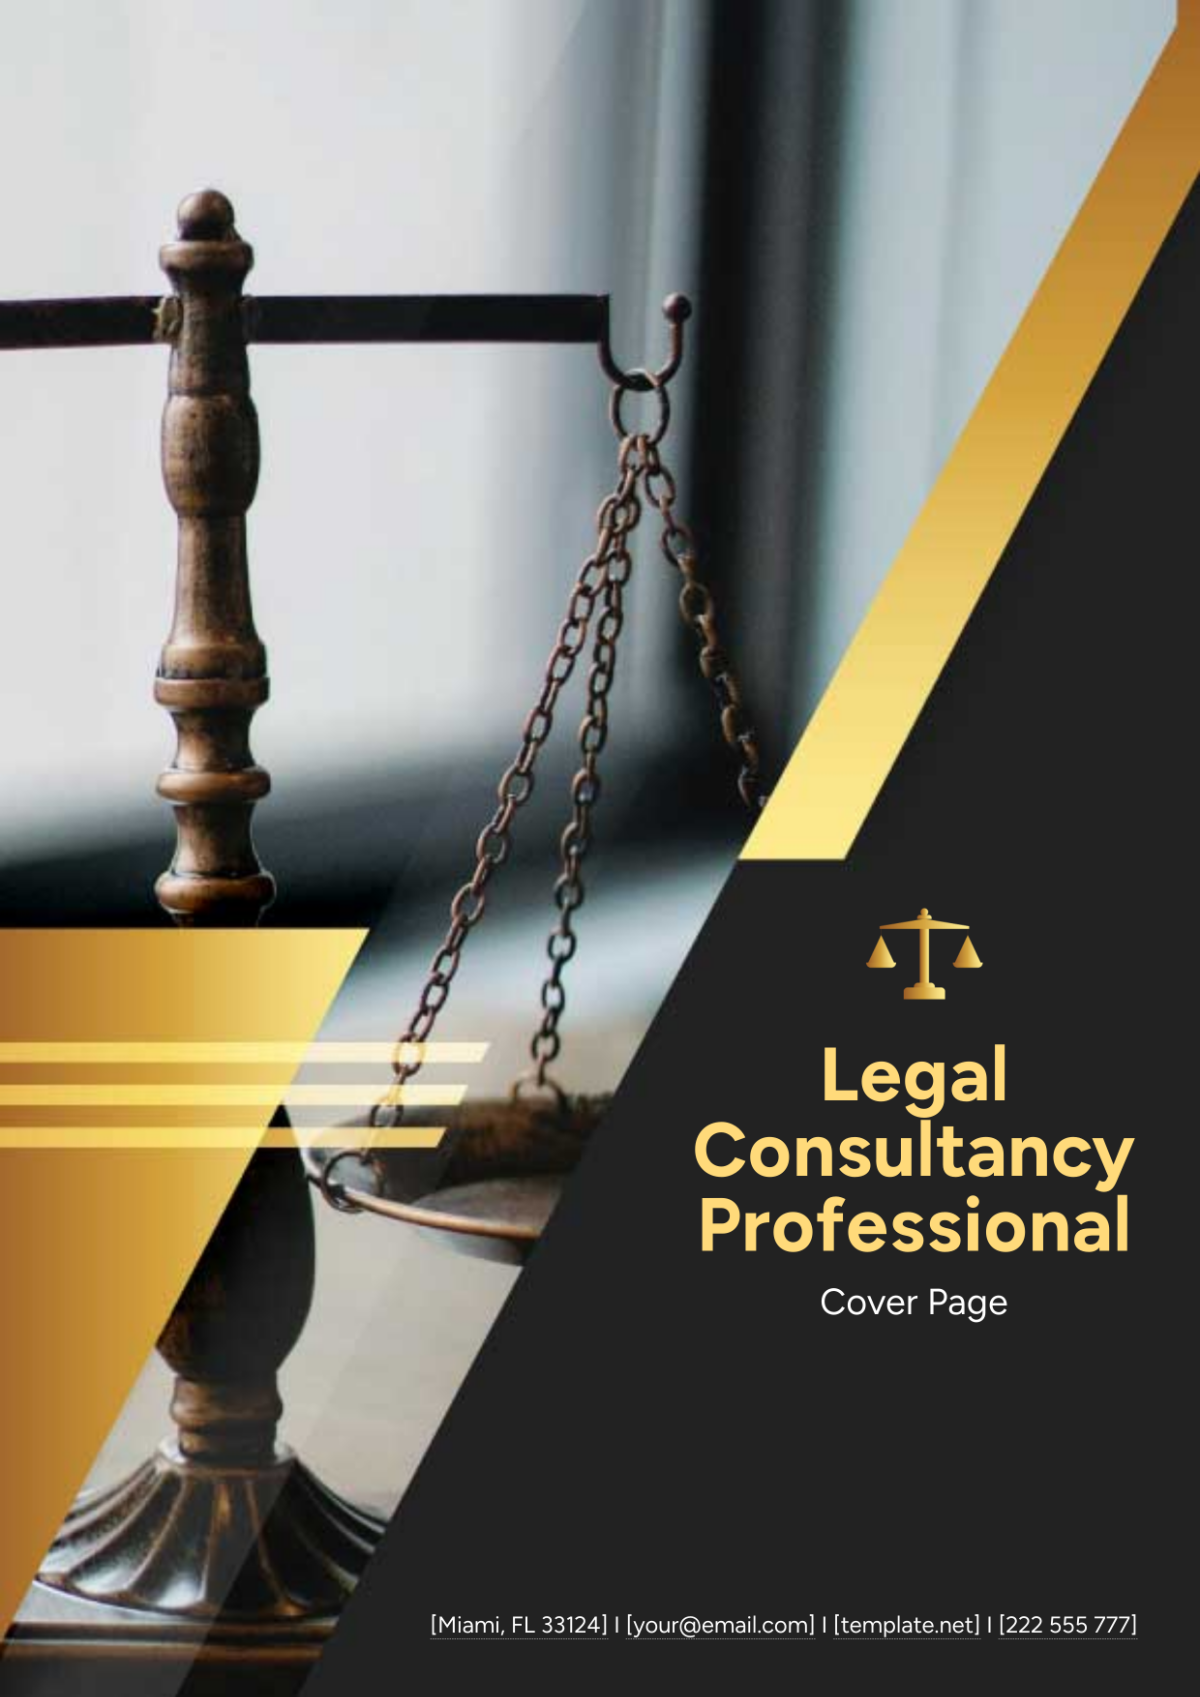 Legal Consultancy Professional Cover Page